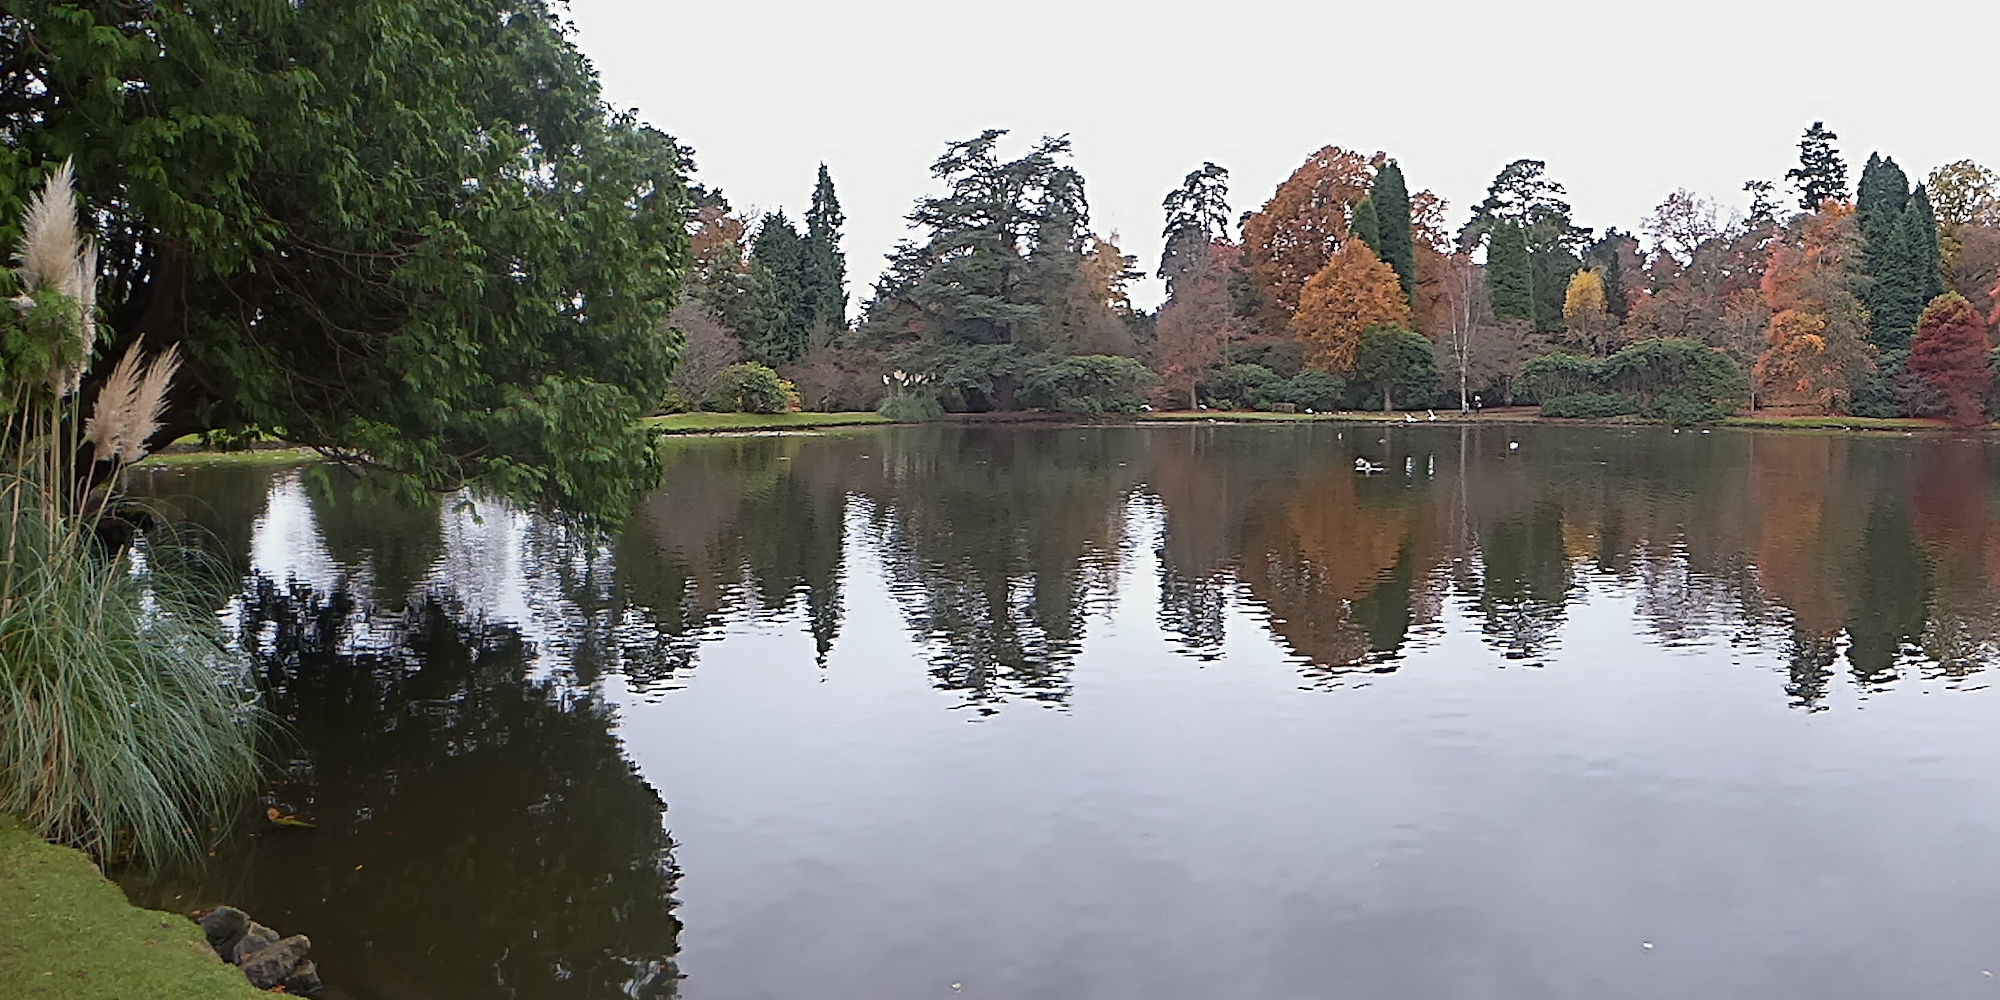 Sheffield Park lake with the trees reflecting in the water